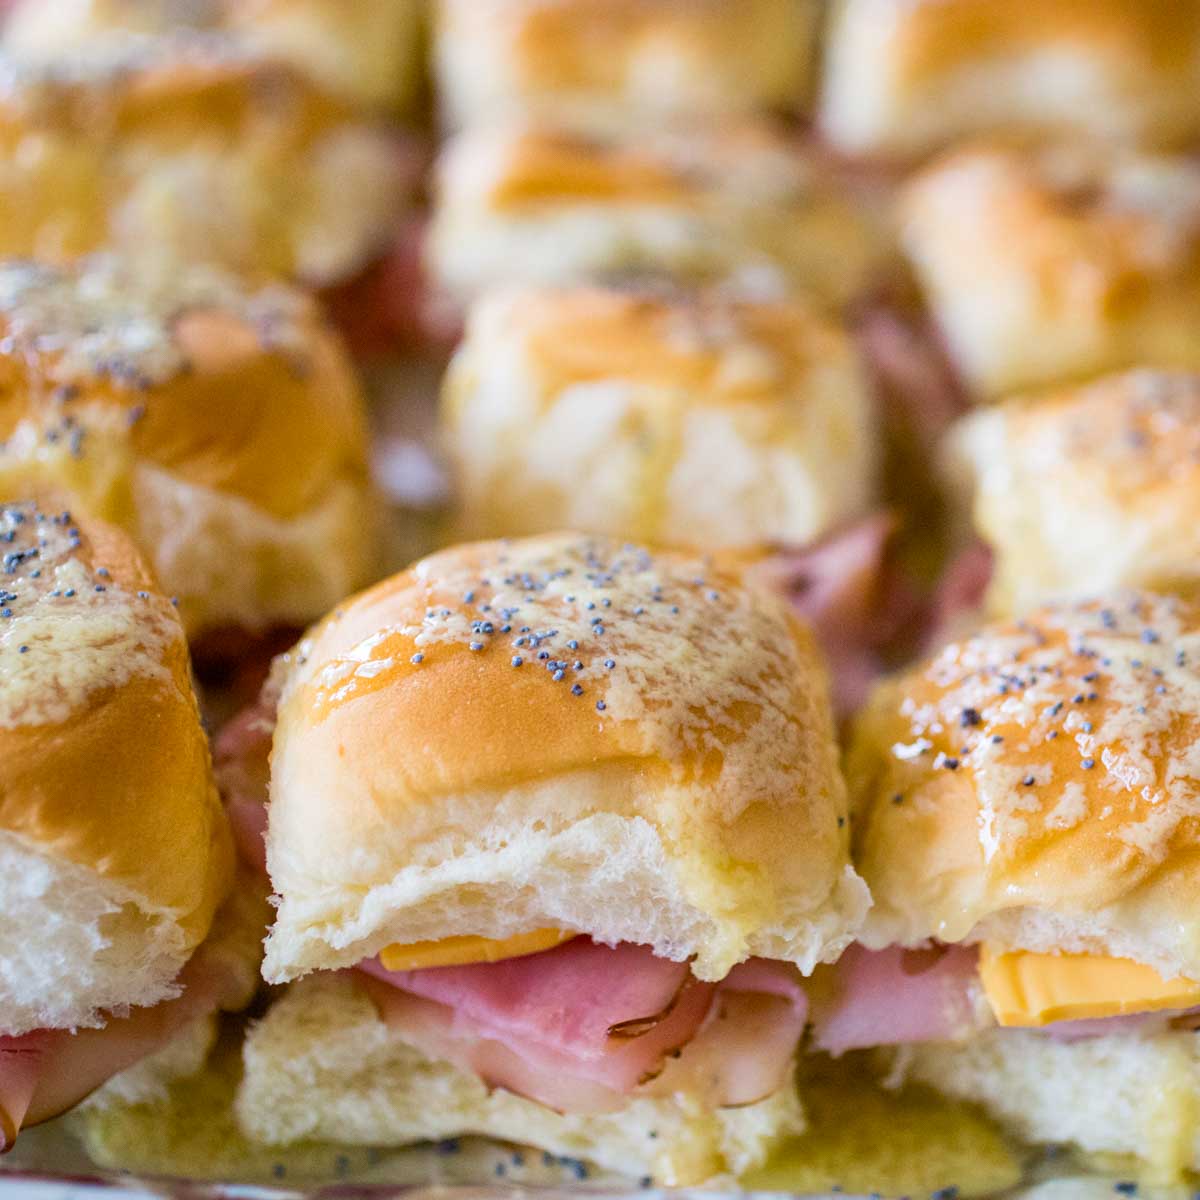 A filled baking pan of mini ham sliders with butter dripping off the top and a sprinkle of poppyseeds on each one.